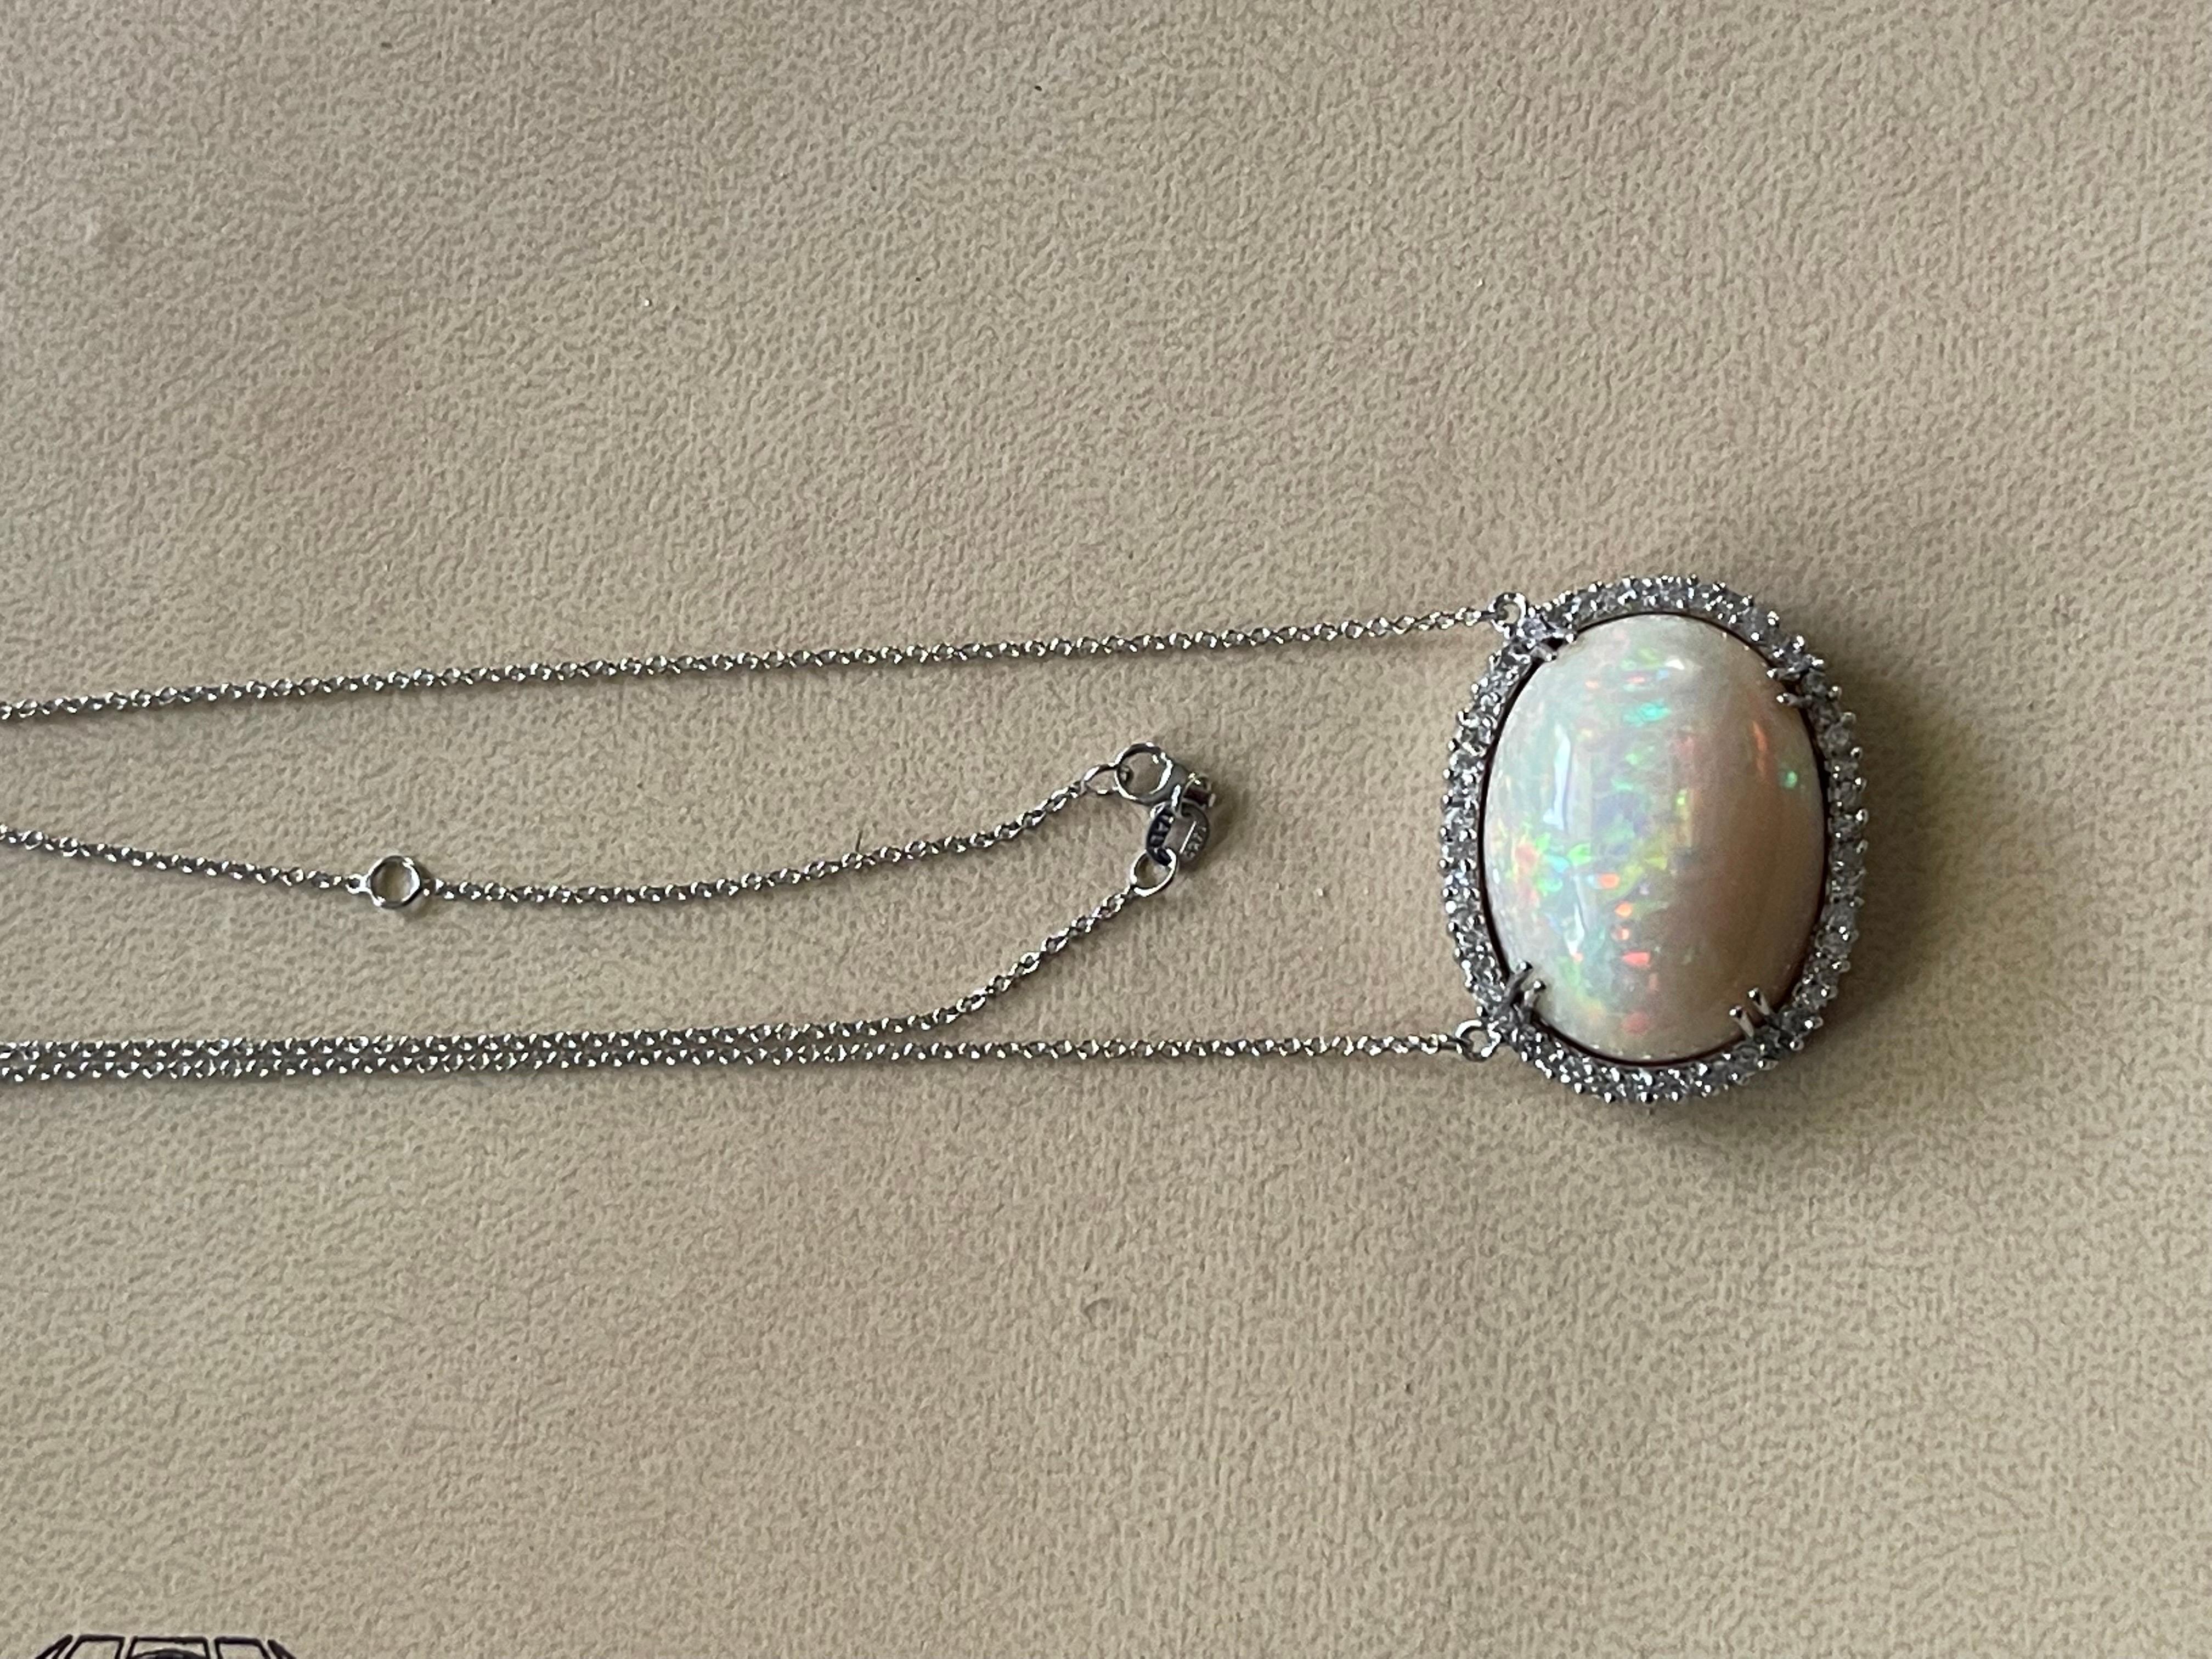 42 Carat Oval Ethiopian Opal & Diamond Pendant 14 Karat White Gold Necklace In Excellent Condition For Sale In New York, NY